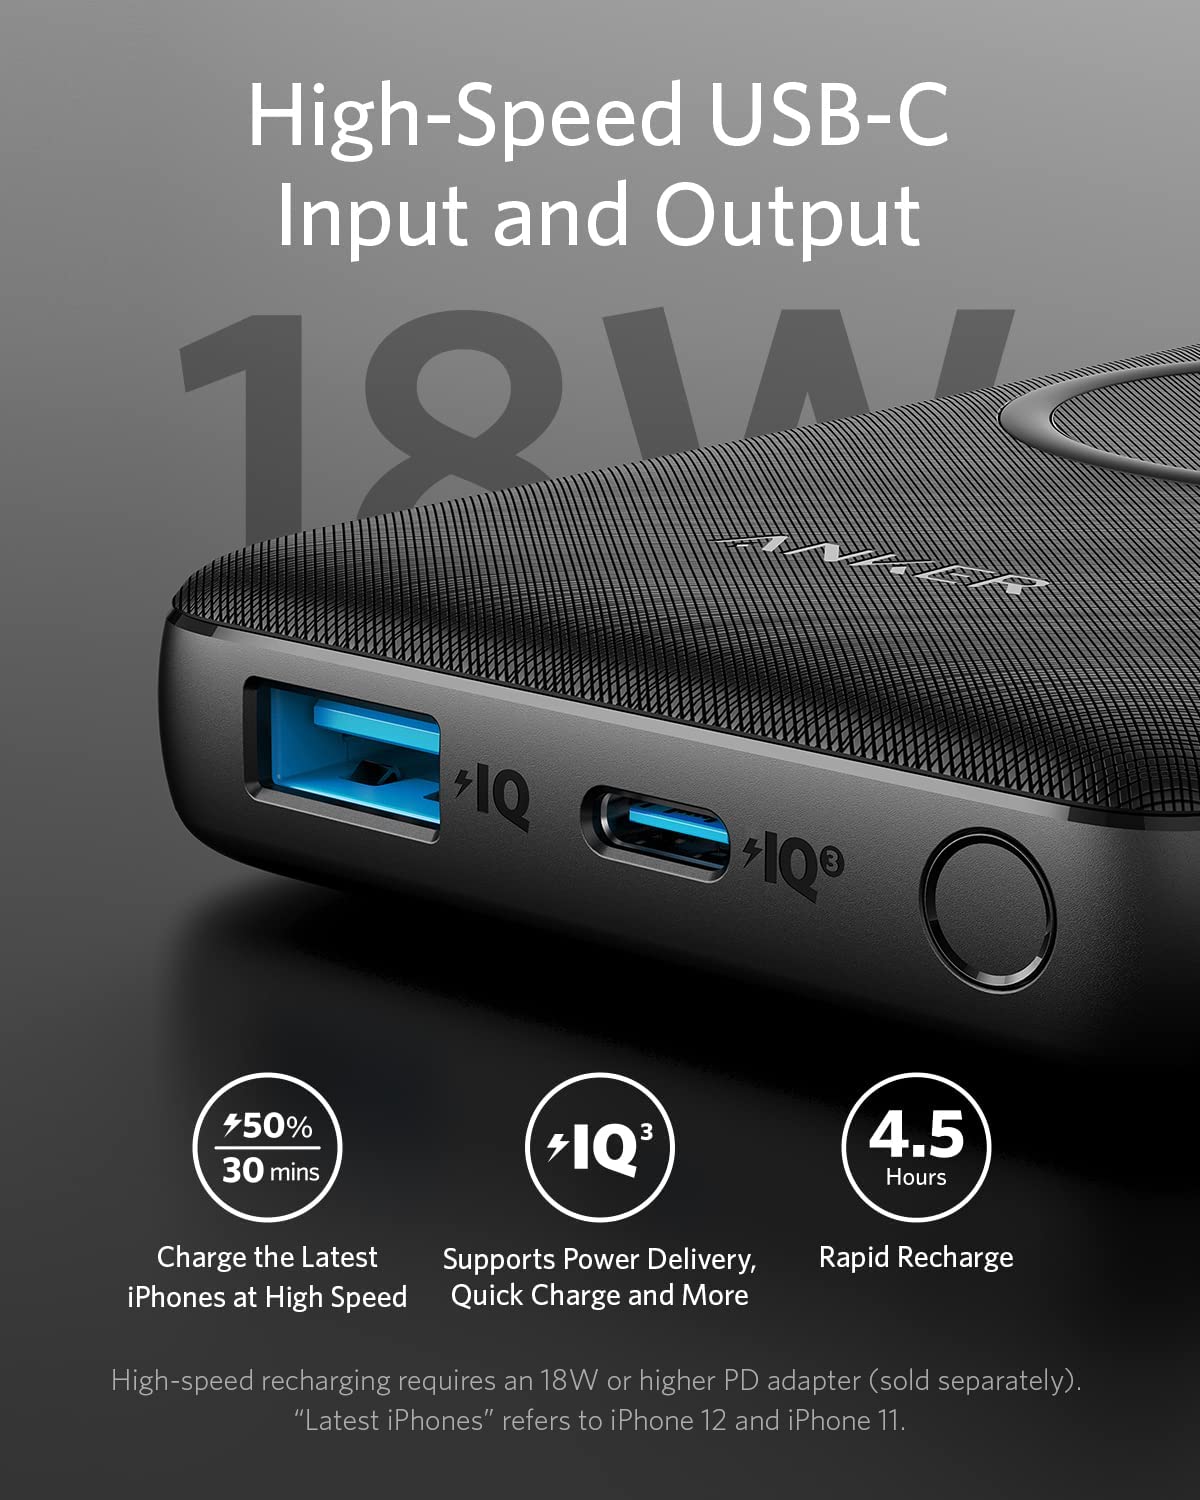 Anker Wireless Power Bank 10 000mAh PowerCore III 10K Wireless Portable Charger with Qi certified 10W Wireless Charging and 18W USB C Quick Charge for iPhone 12 Pro Pro Max 11 Pro iPad - DealYaSteal